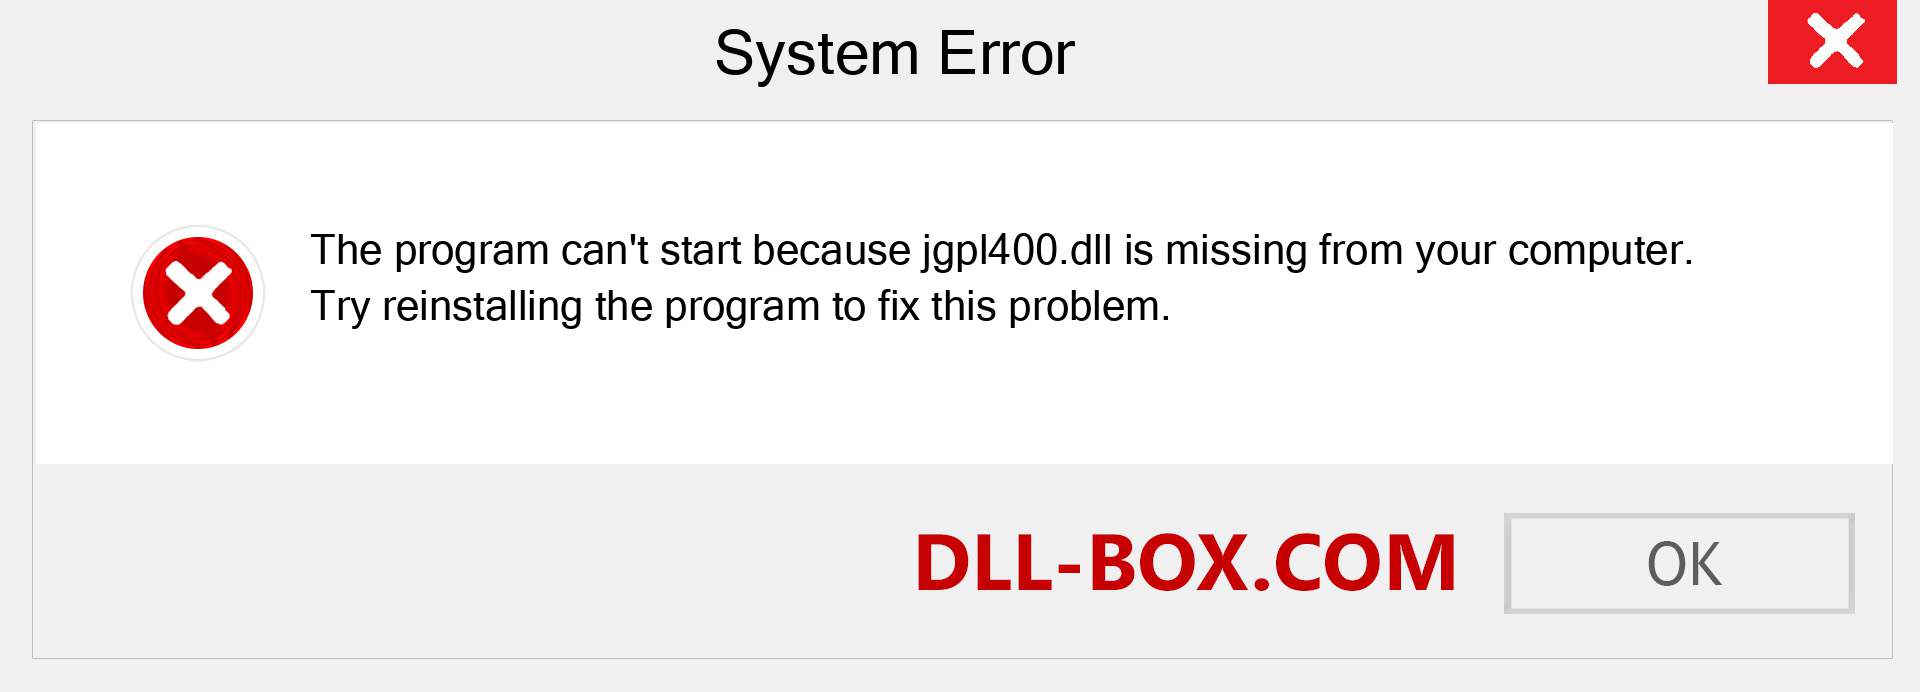  jgpl400.dll file is missing?. Download for Windows 7, 8, 10 - Fix  jgpl400 dll Missing Error on Windows, photos, images